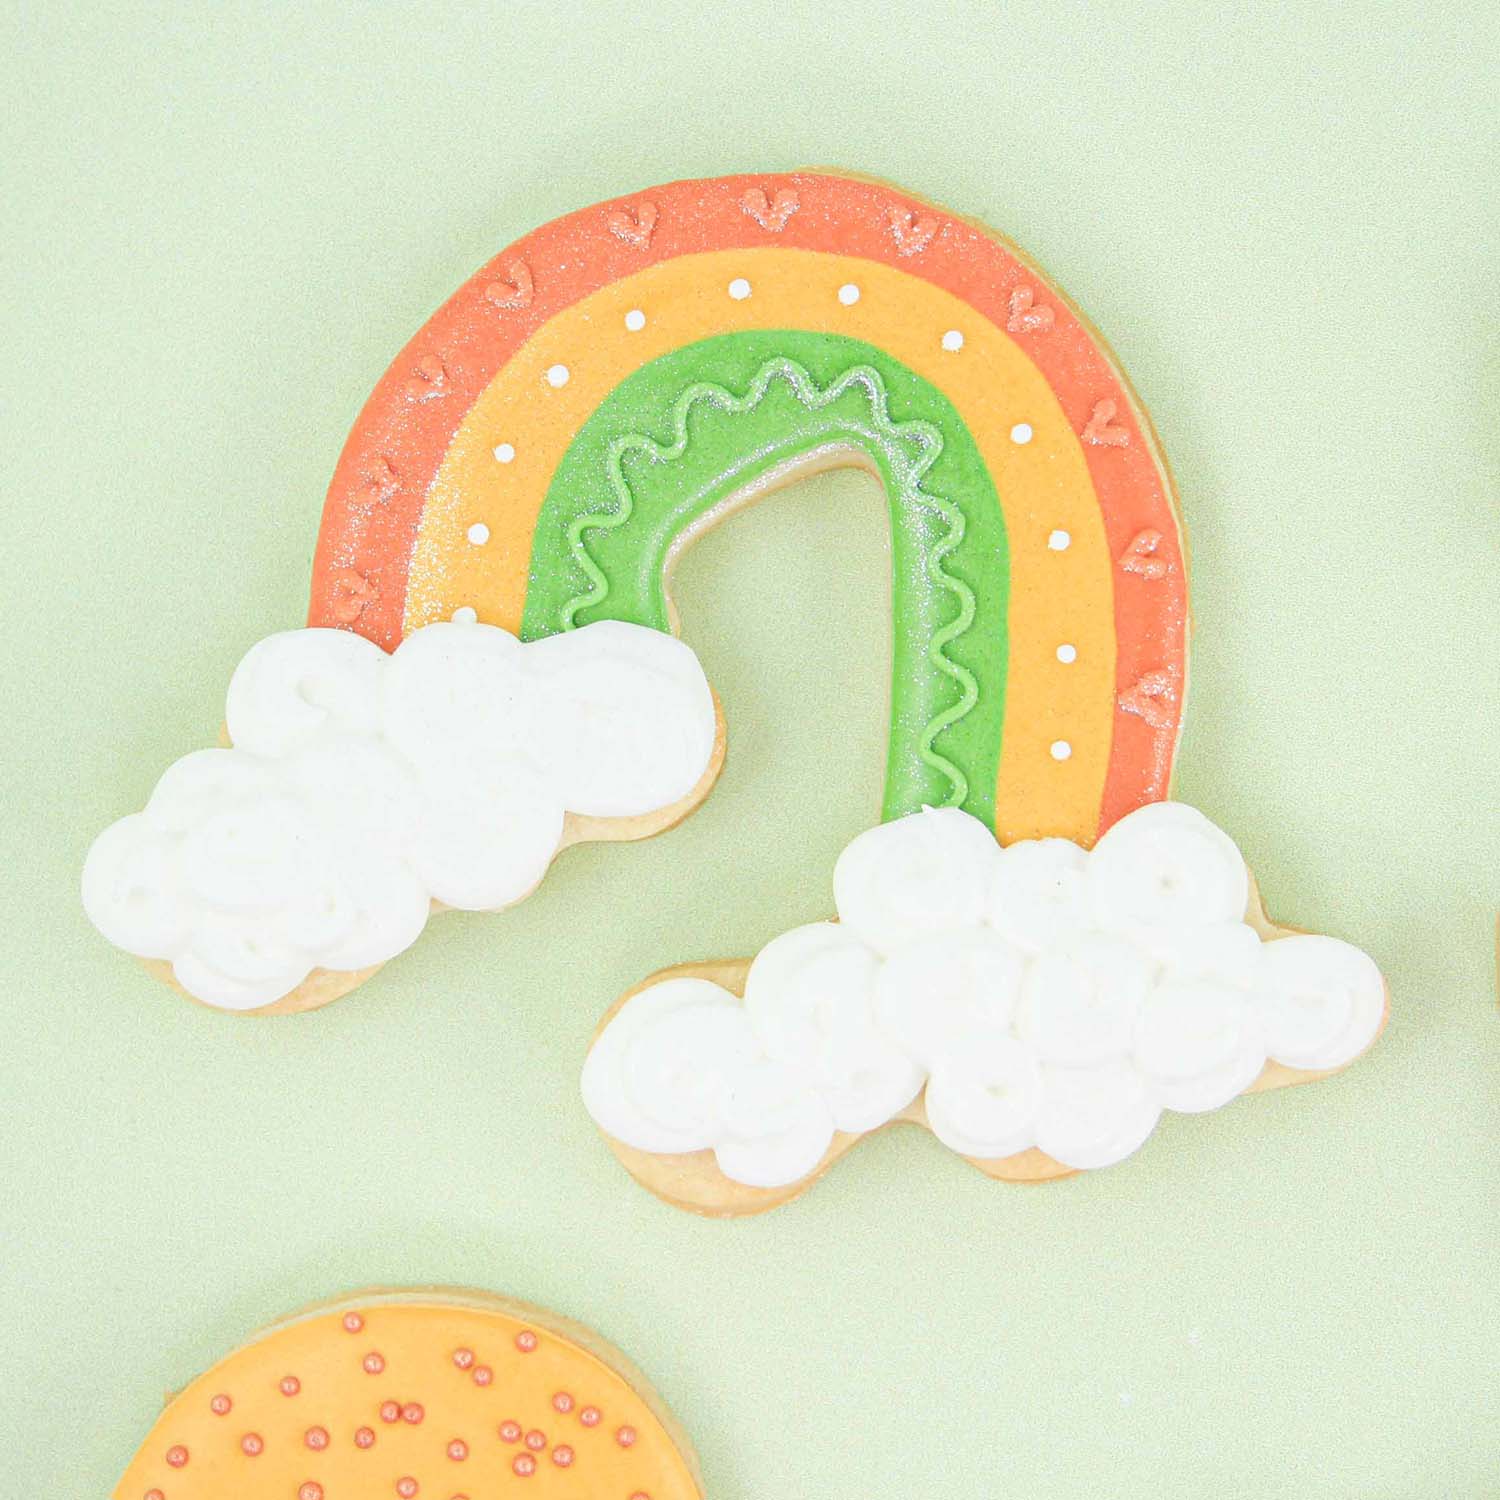 Rainbow Cookie with orang yellow and green arcs and fluffy white clouds decorated in royal icing